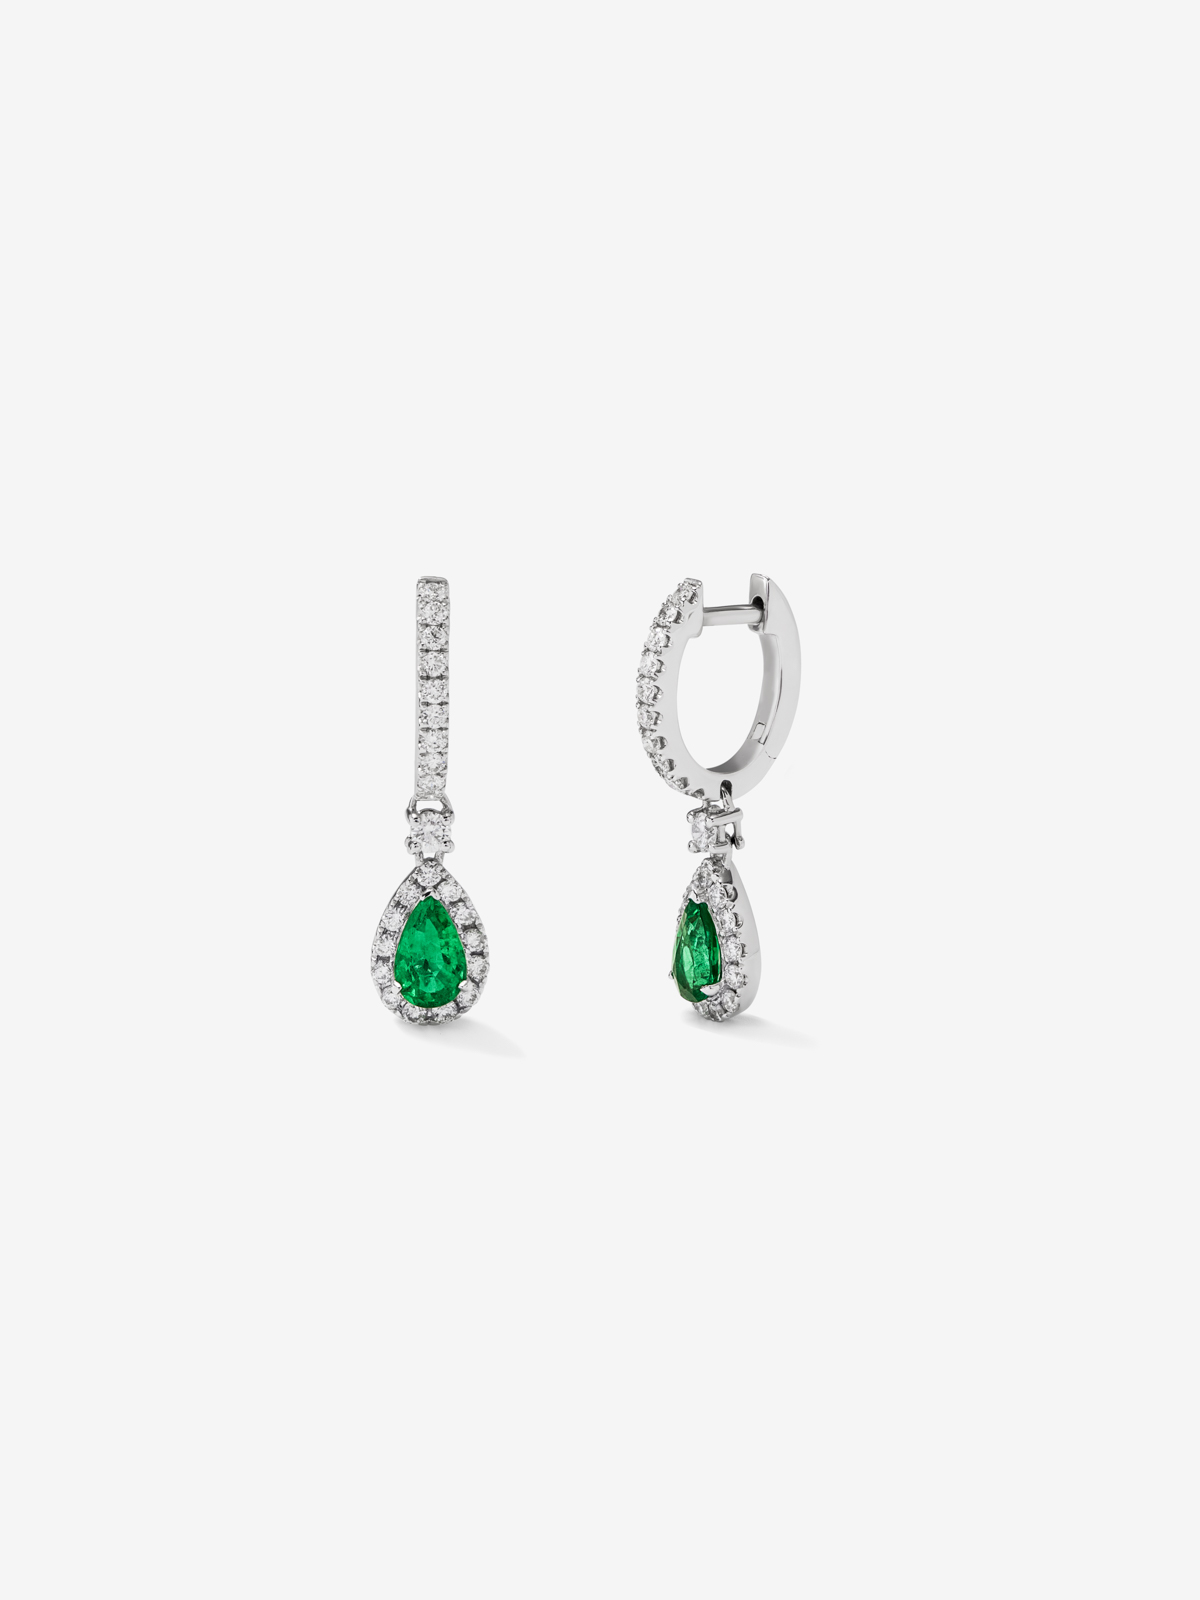 18K white gold earrings with green emeralds in 0.7 cts and white diamonds in bright 0.53 cts